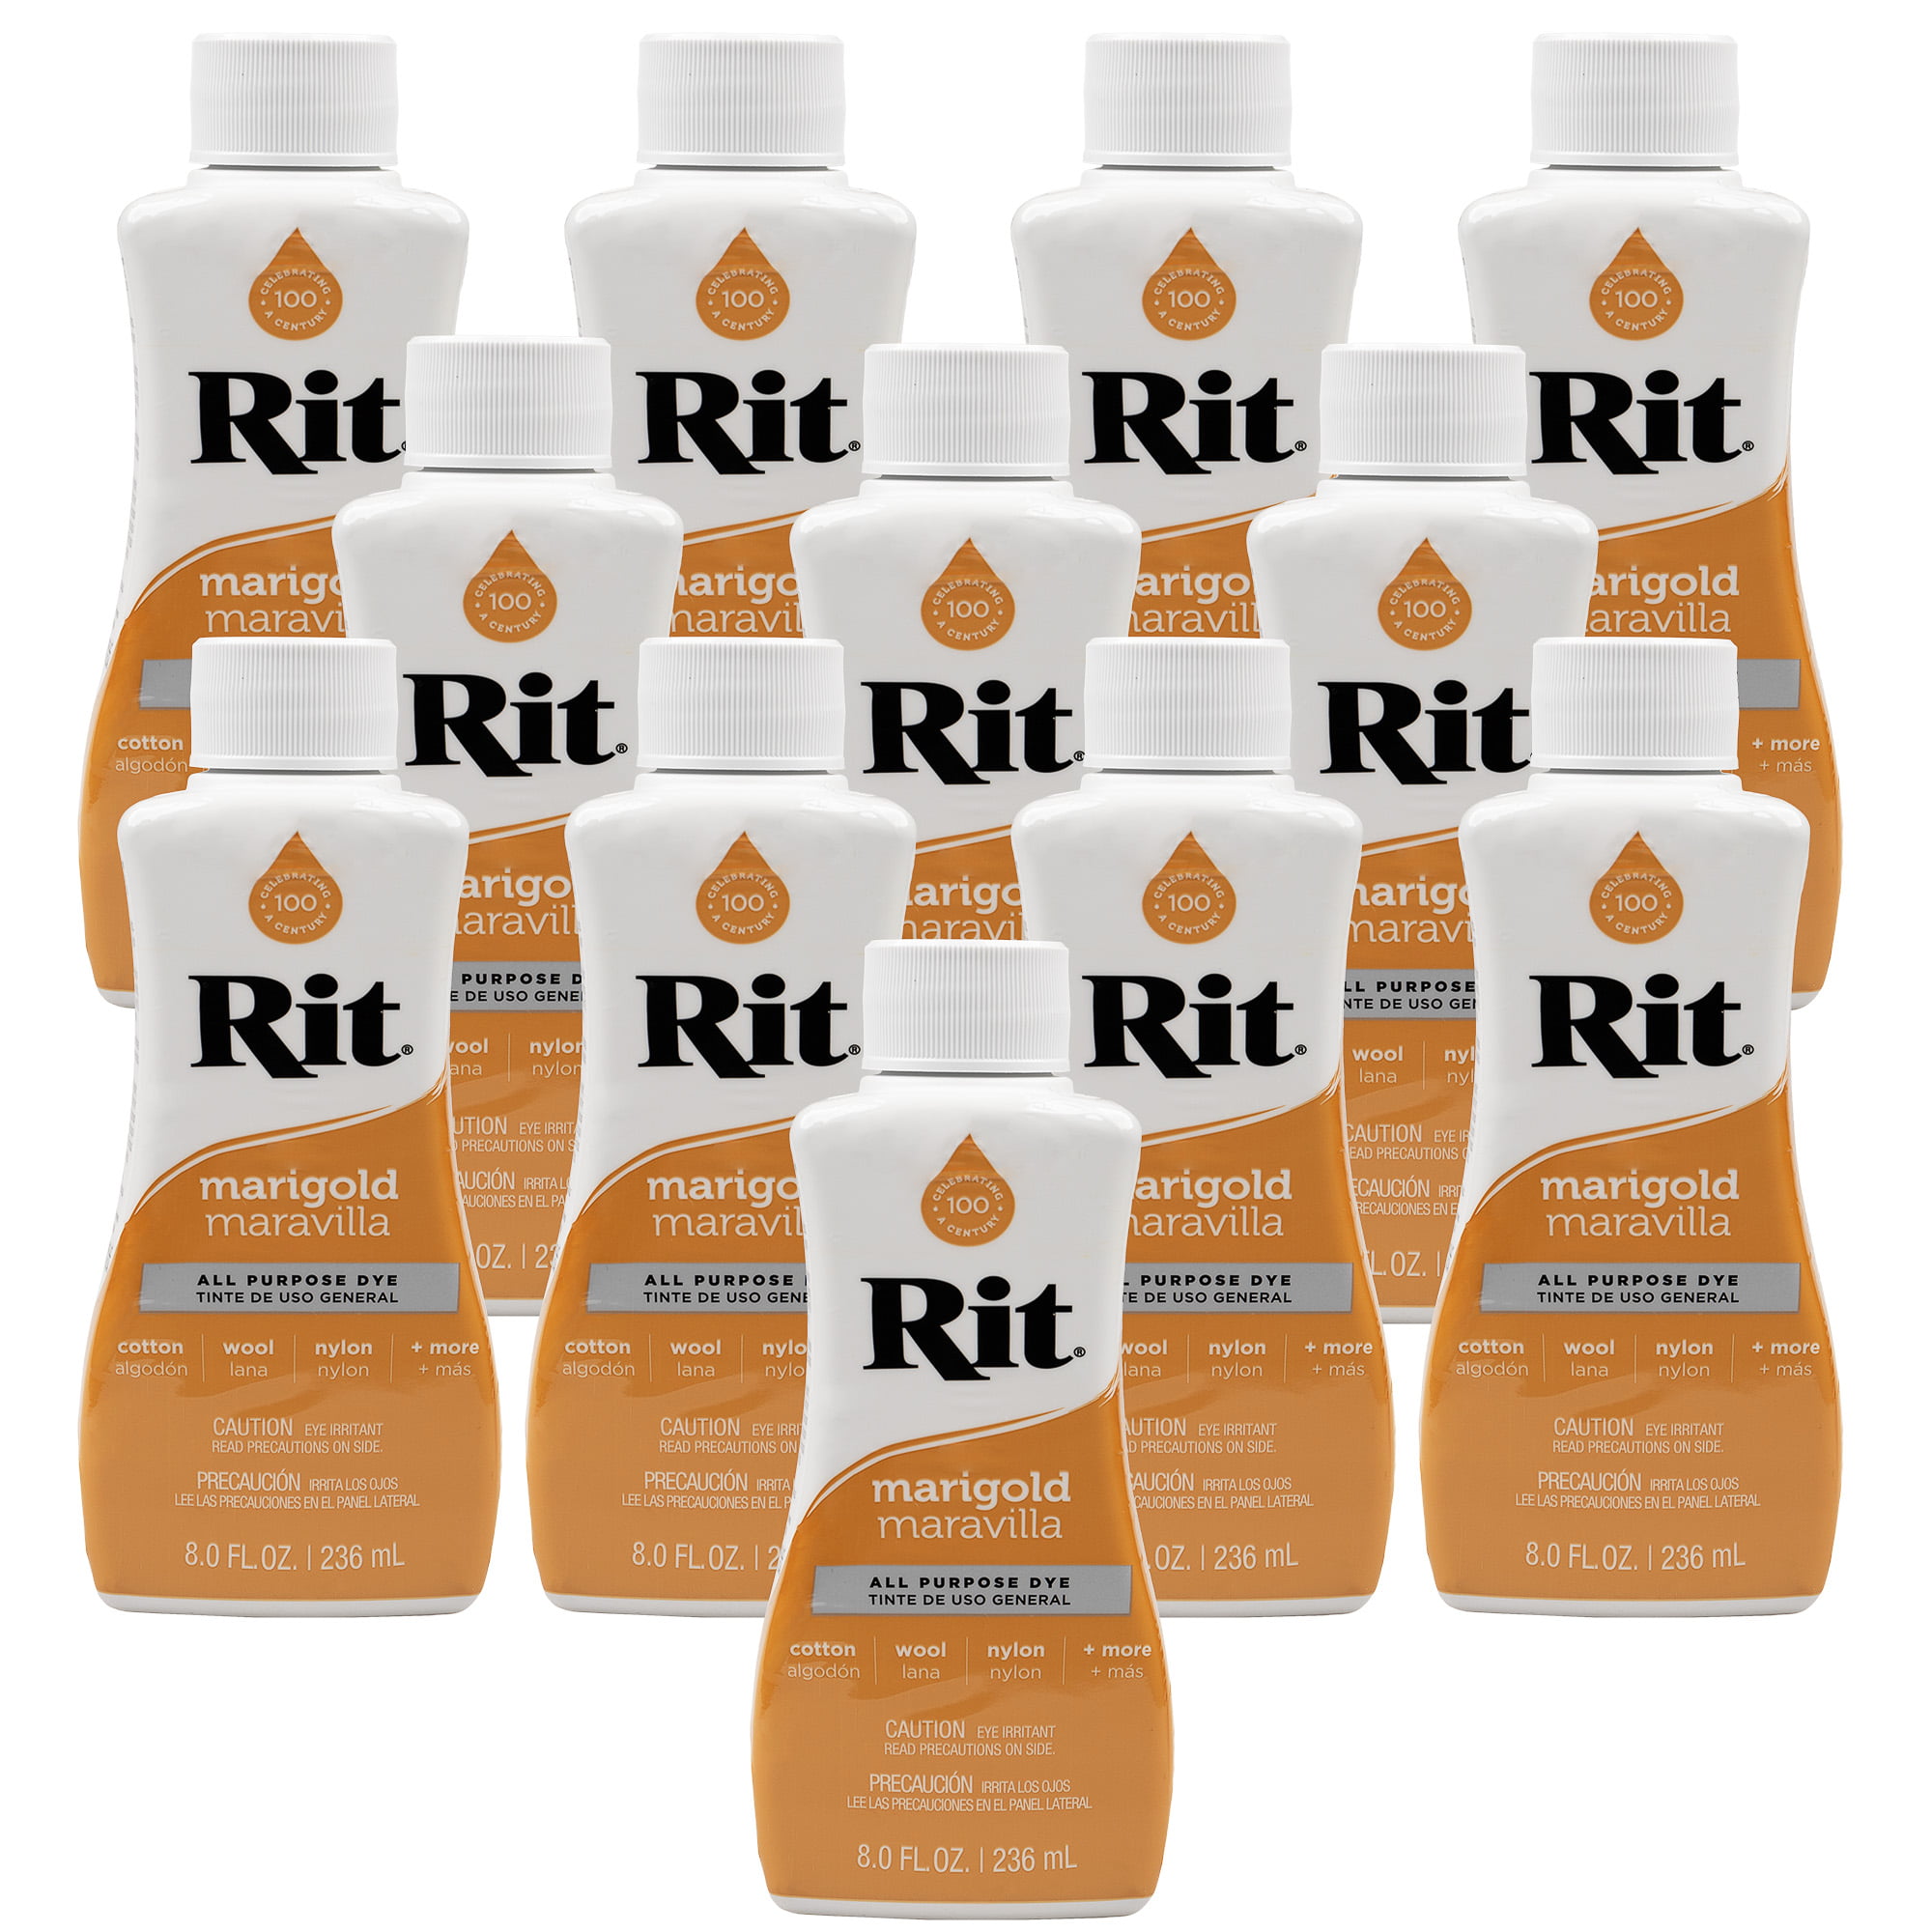 Rit DyeMore  Synthetic 7oz Liquid 12-Pack Case - Graphite 